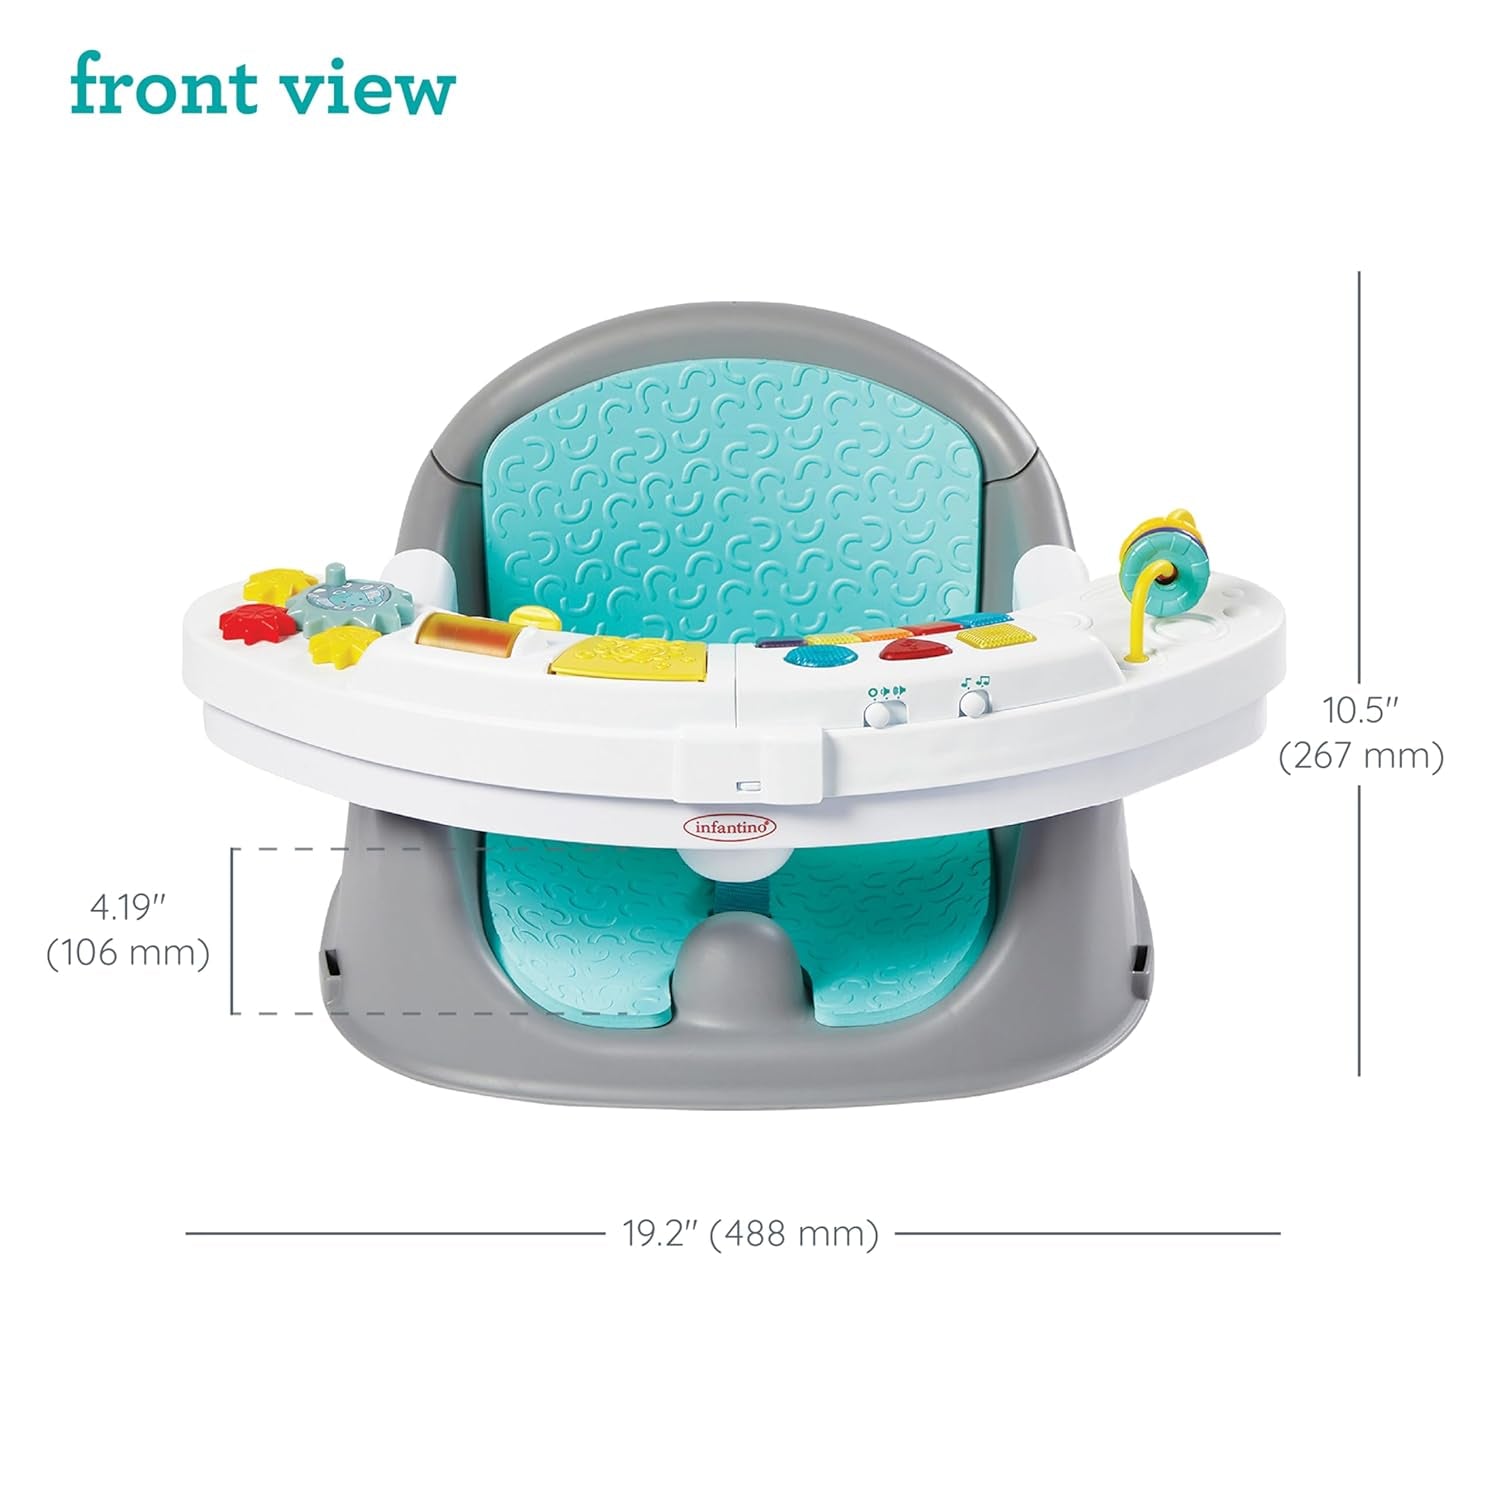 Music & Lights 3-In-1 Discovery Seat and Booster - Convertible, Infant Activity and Feeding Seat with Electronic Piano for Sensory Exploration, for Babies and Toddlers, Teal